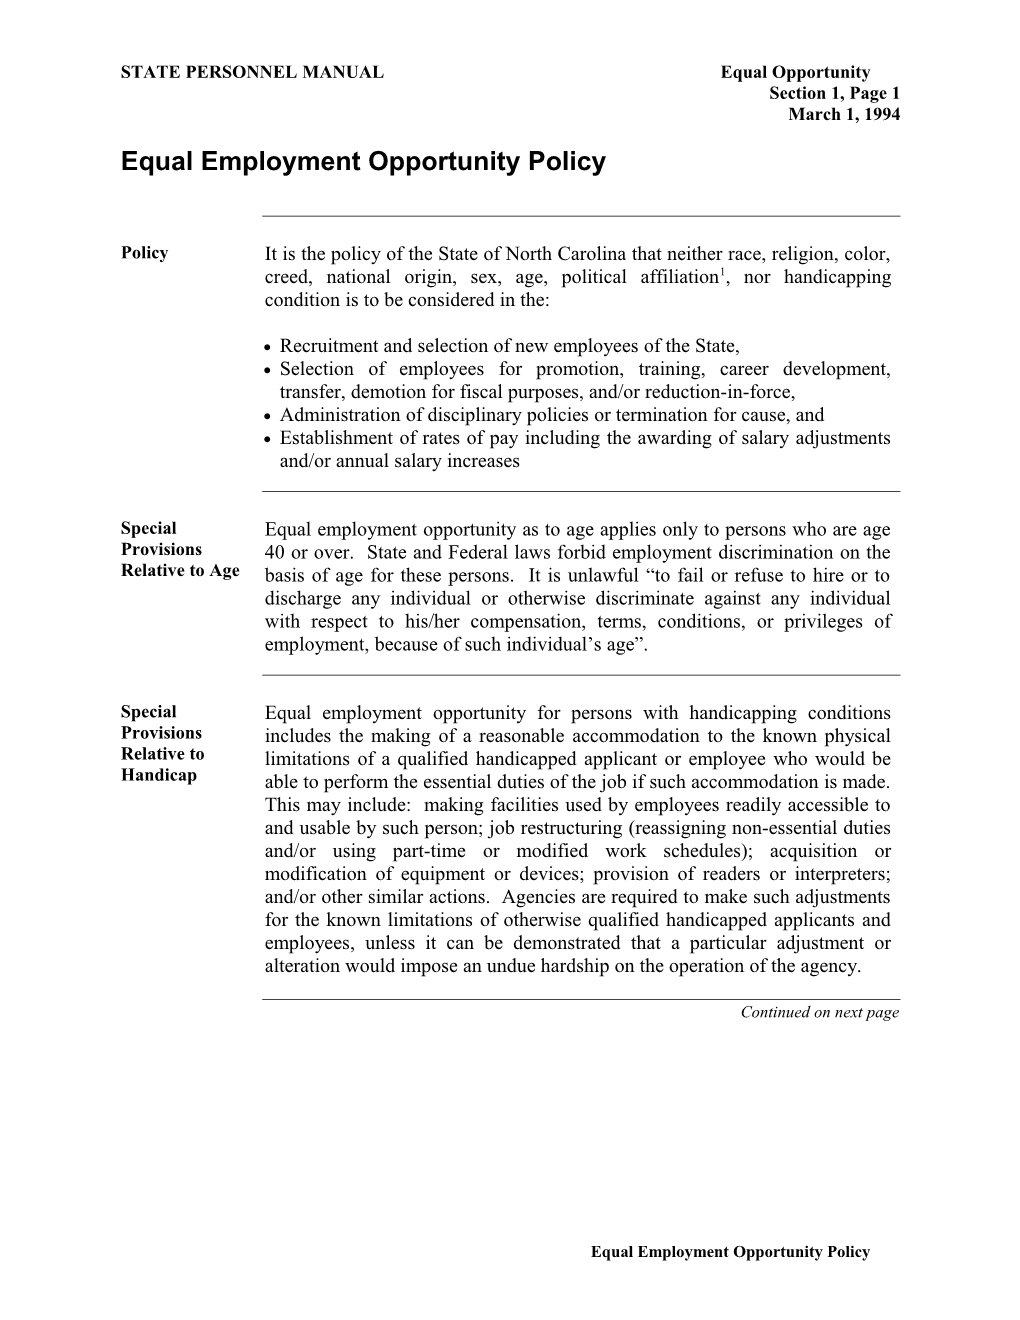 Equal Employment Opportunity Policy